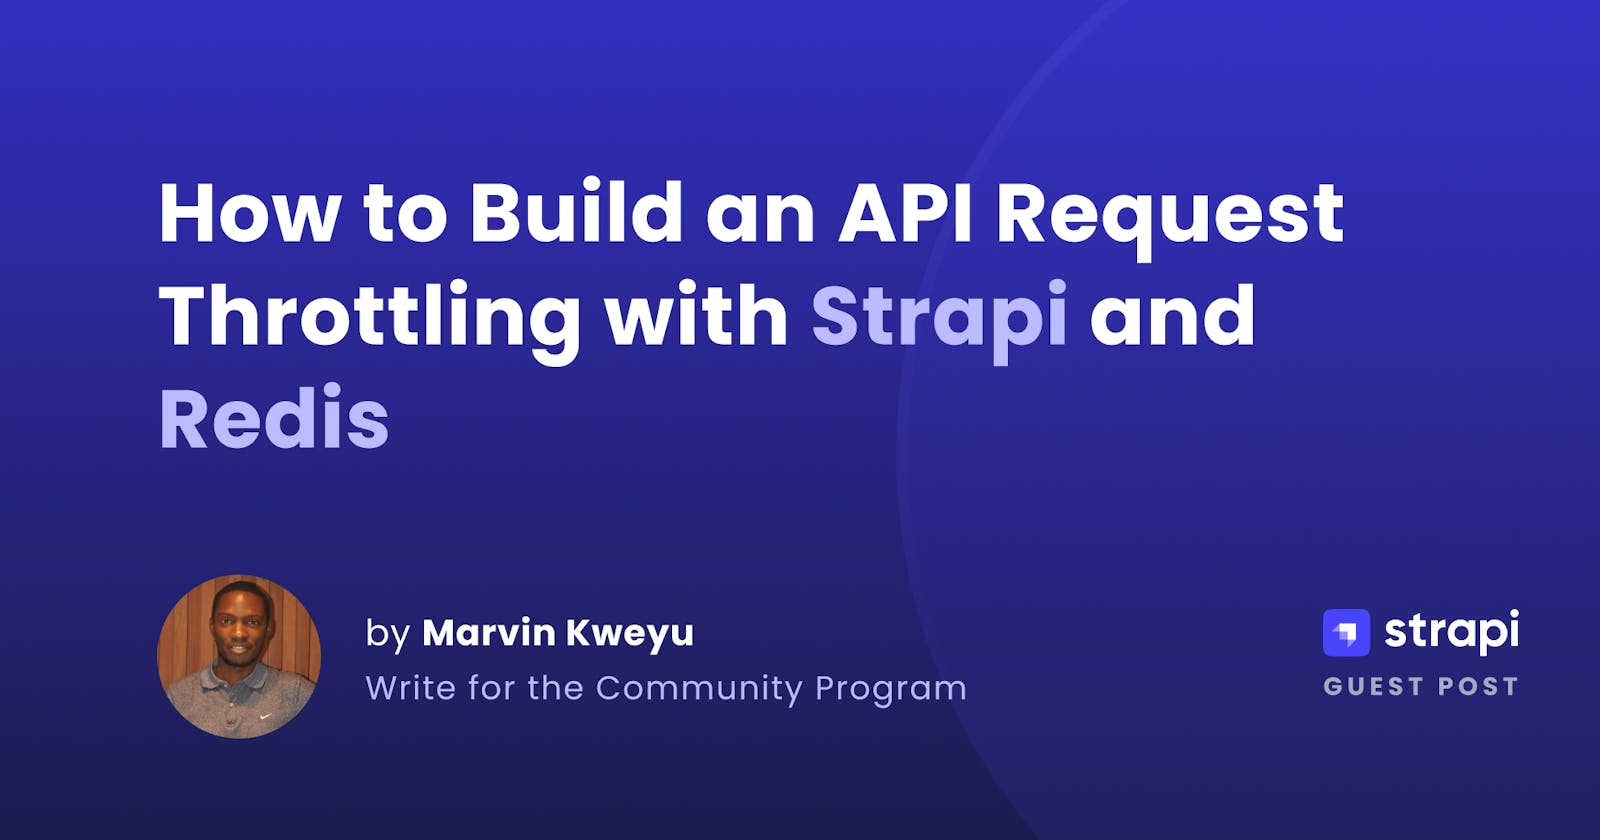 How to Build an API Request Throttling with Strapi and Redis